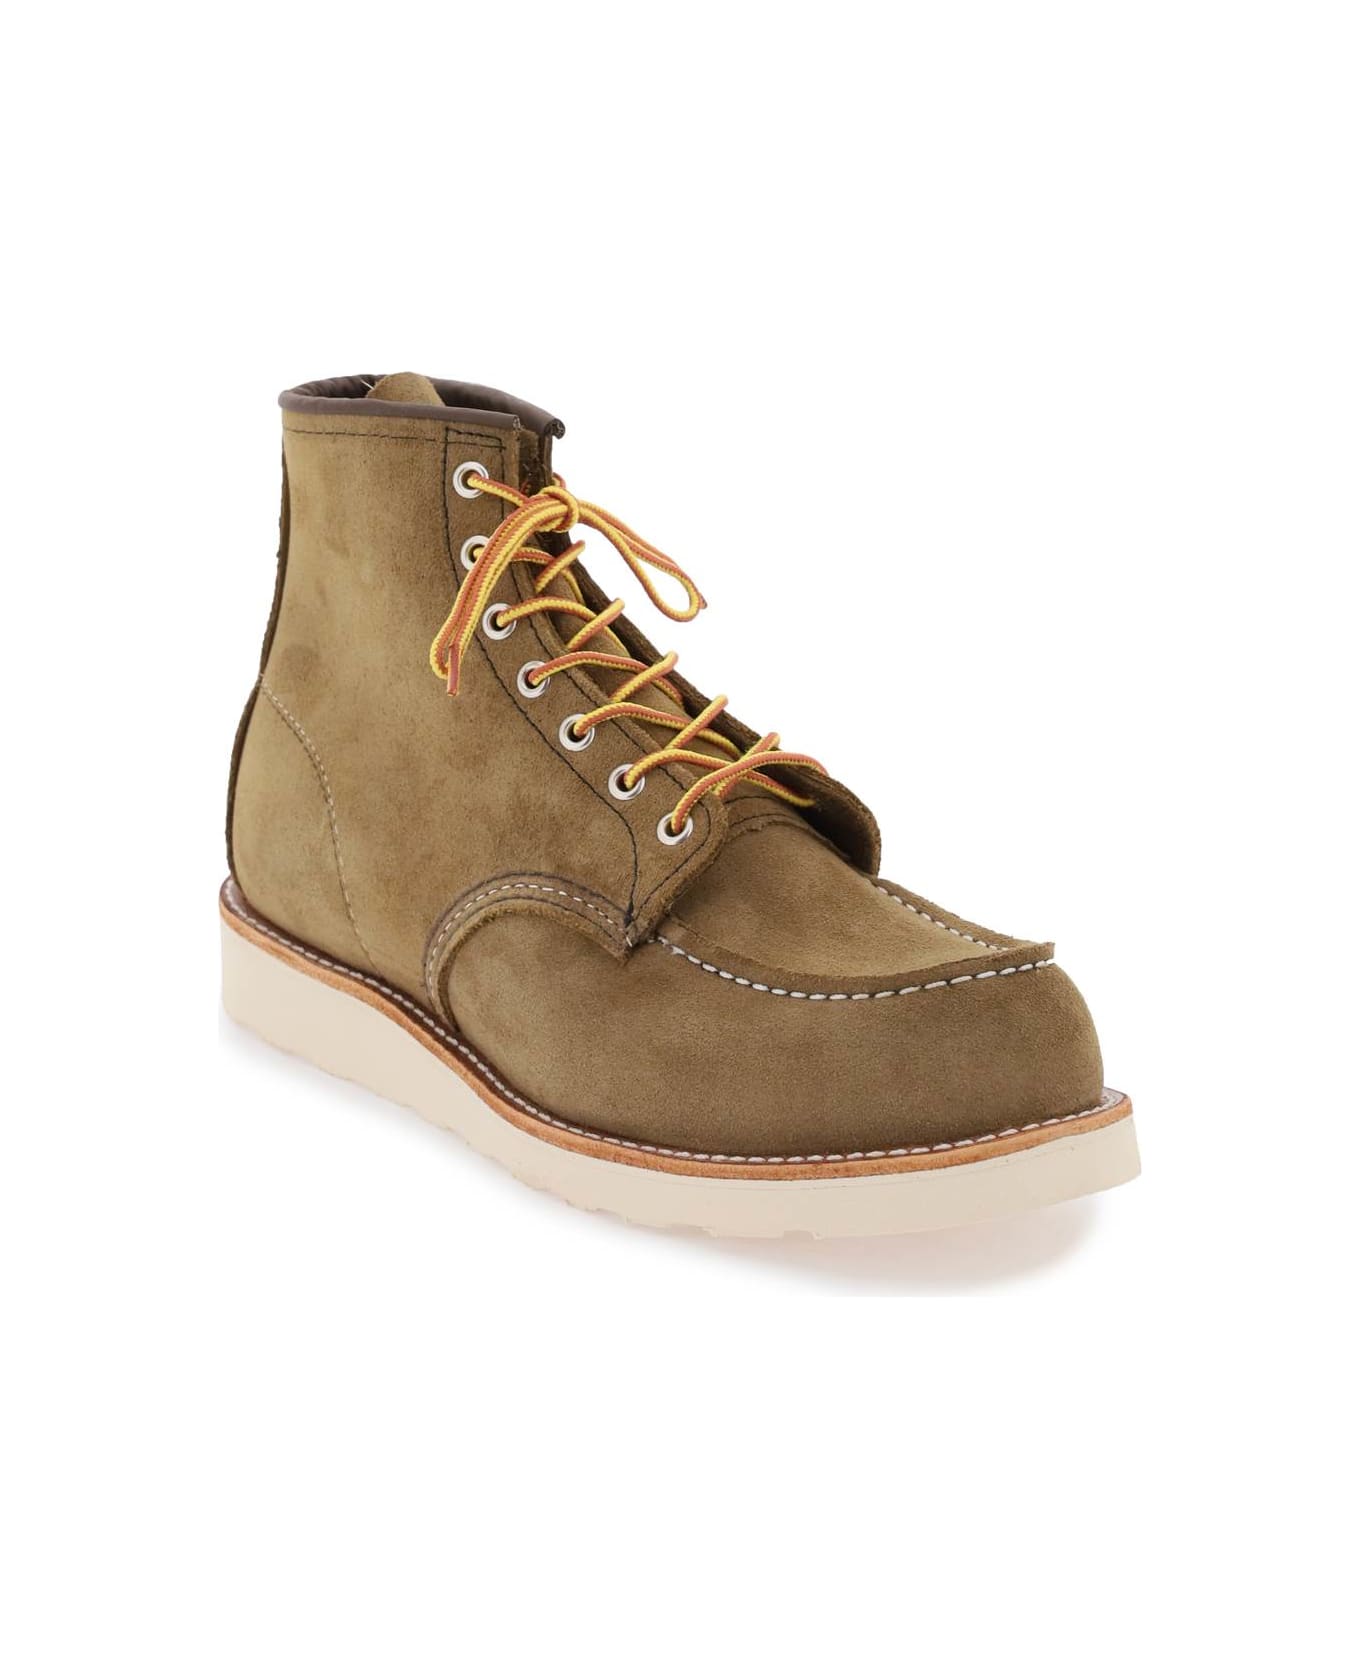 Red Wing Classic Moc Ankle Boots - OLIVE MOHAVE (Khaki) ブーツ